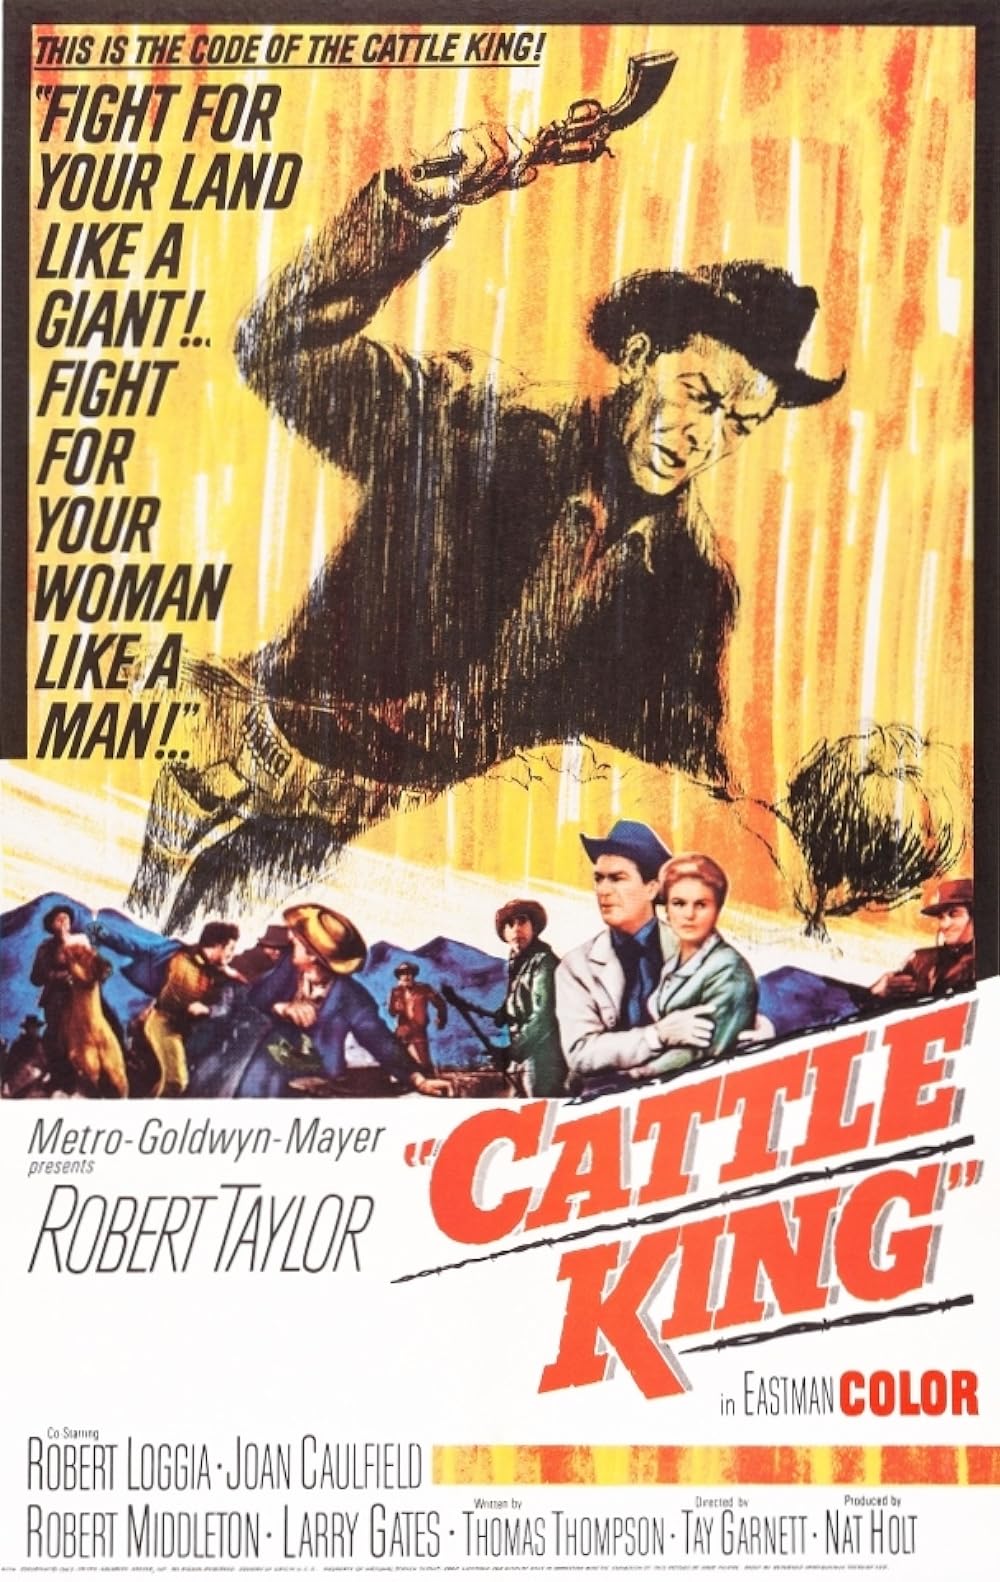 Cattle King